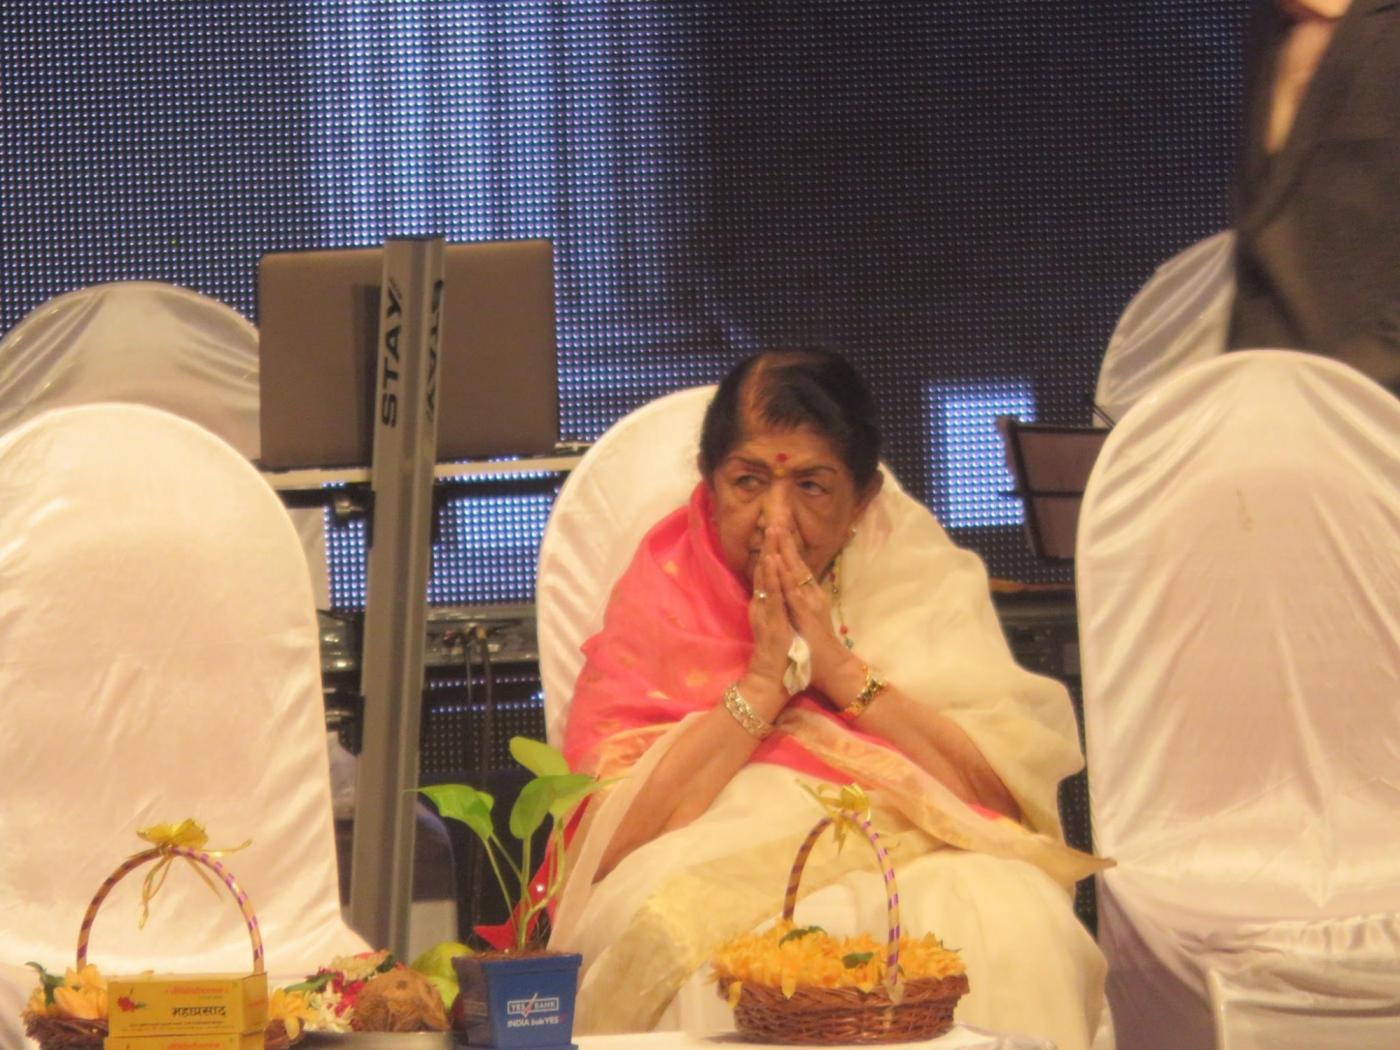 Mumbai: Melody queen Lata Mangeshkar during the celebration of her 75 glorious years of musical journey in Mumbai on Oct 26, 2017.(Photo: IANS) by .